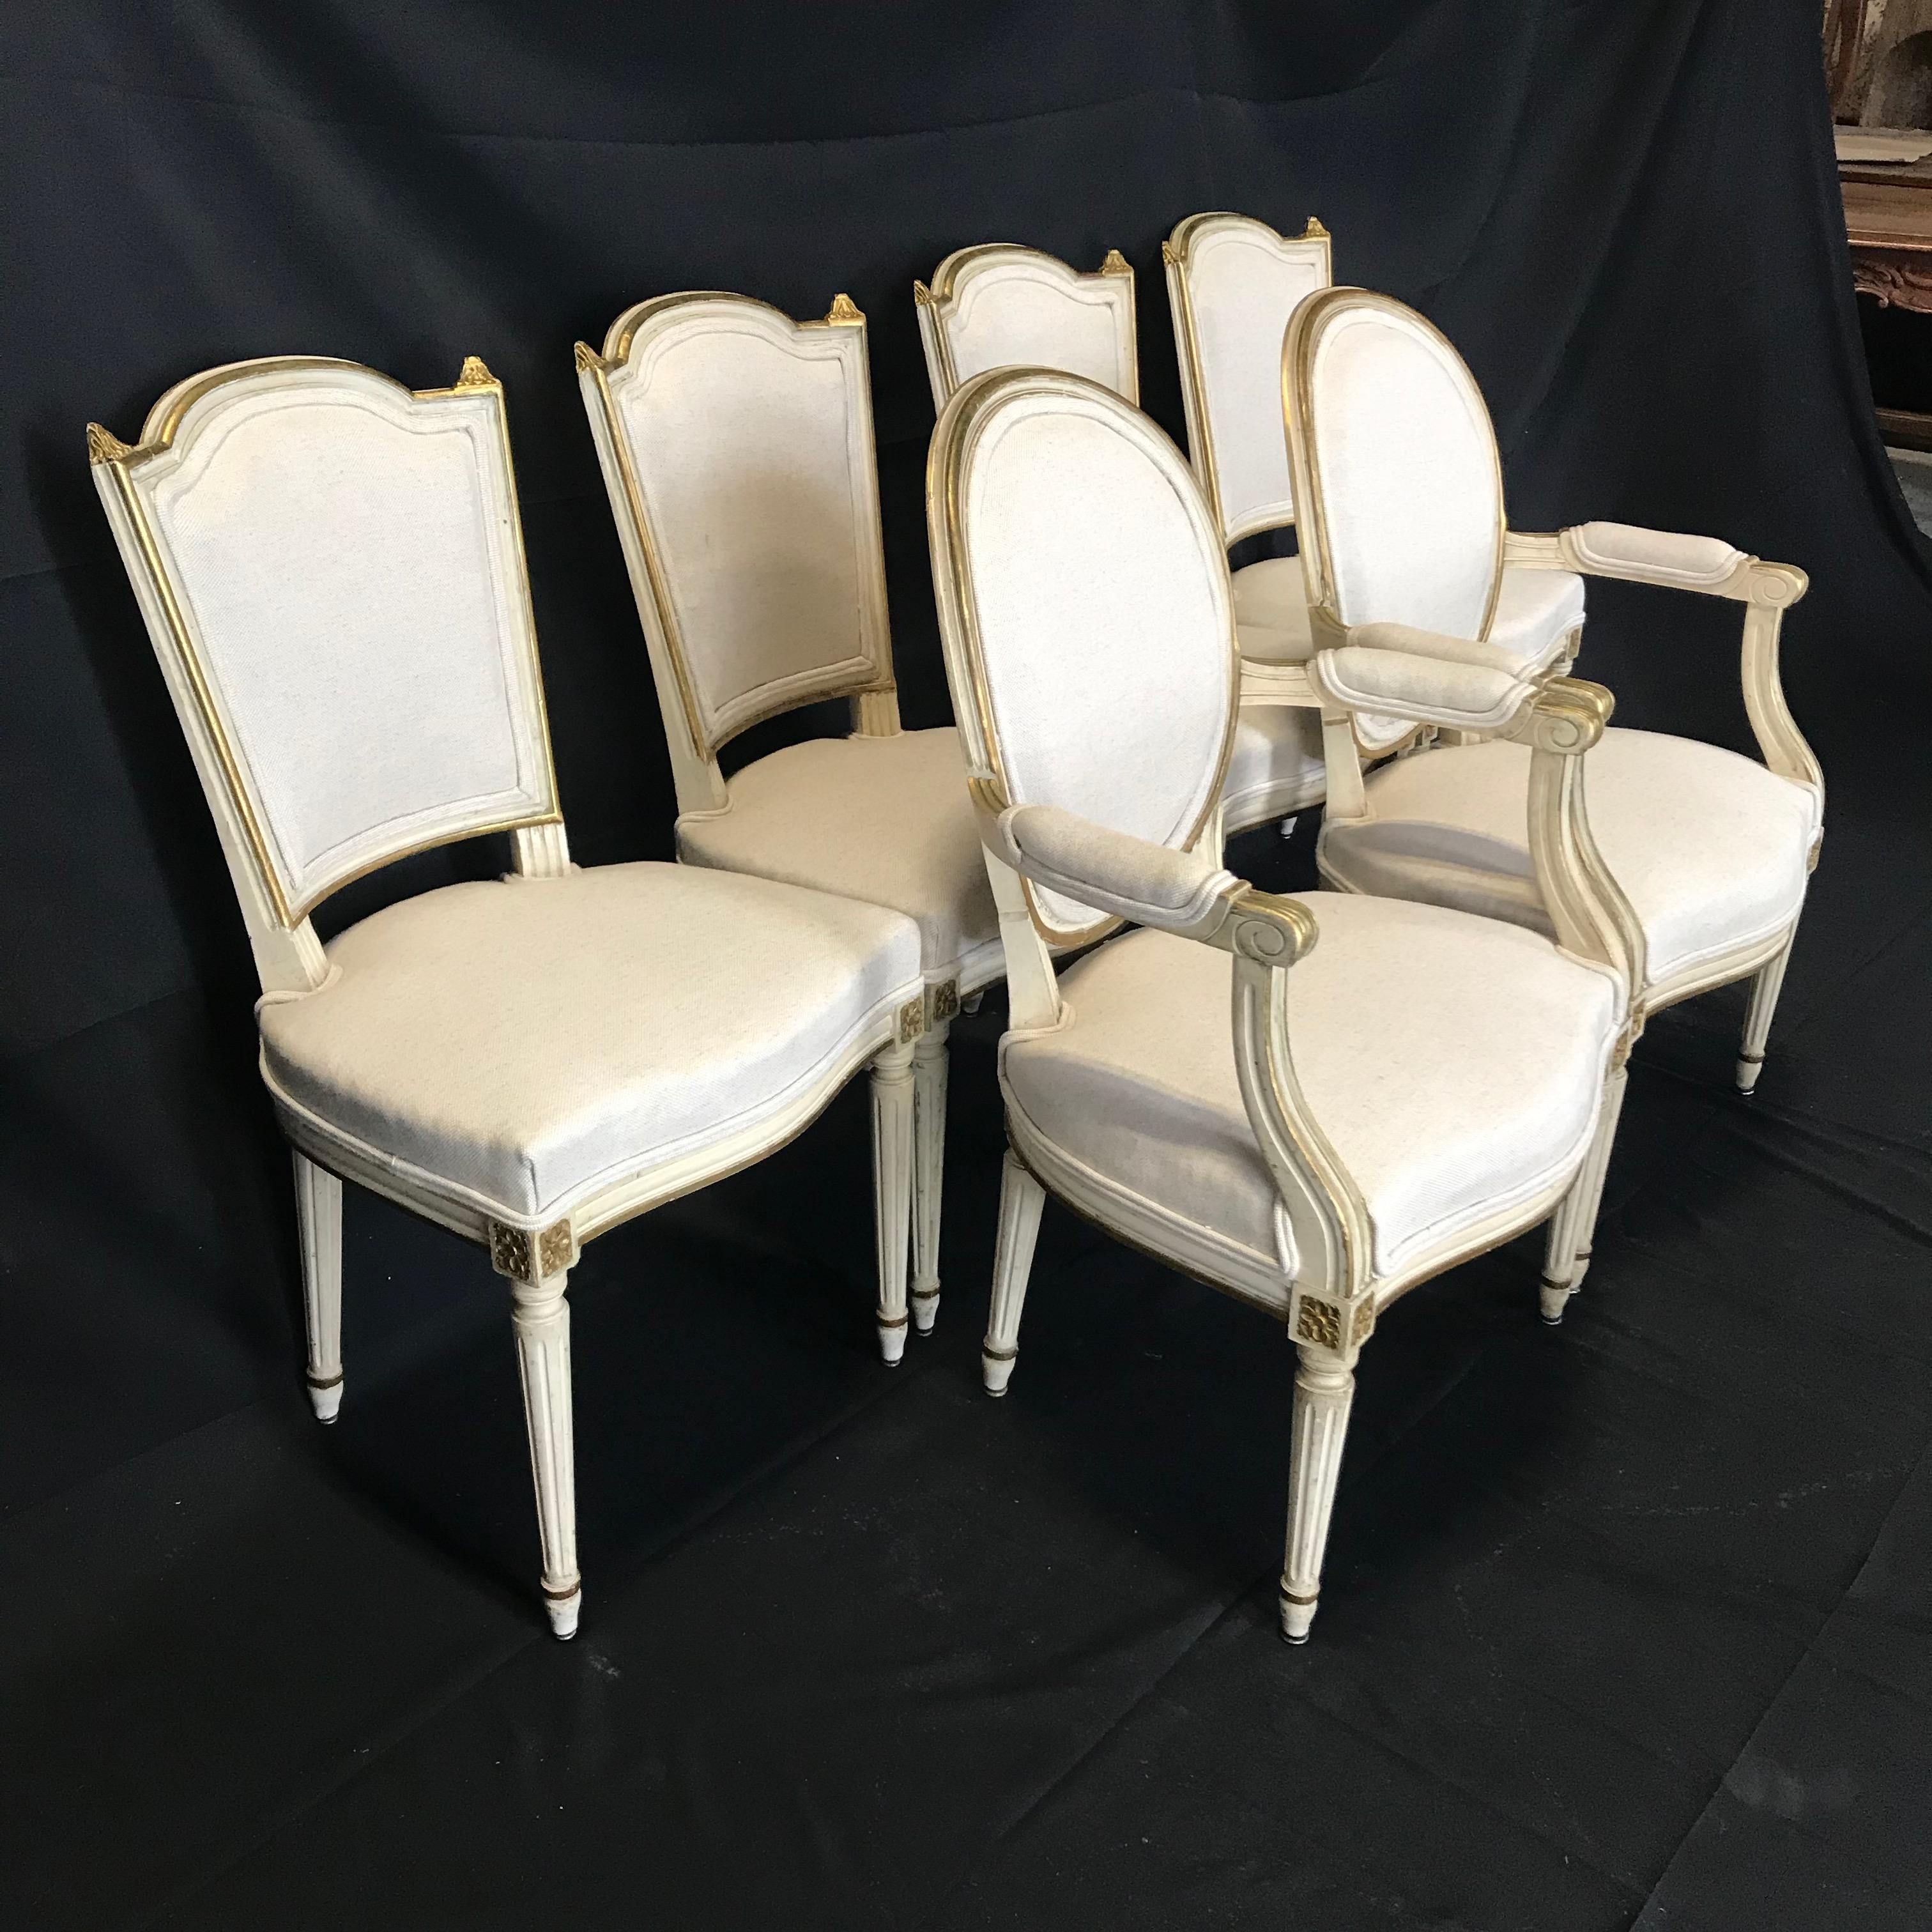 Elegant highly decorative set of 6 antique French Louis XVI dining chairs that date to the 19th century. The Classic form of the chairs combined with the beautiful natural patina of both the painted surfaces and the newly upholstered fabric make